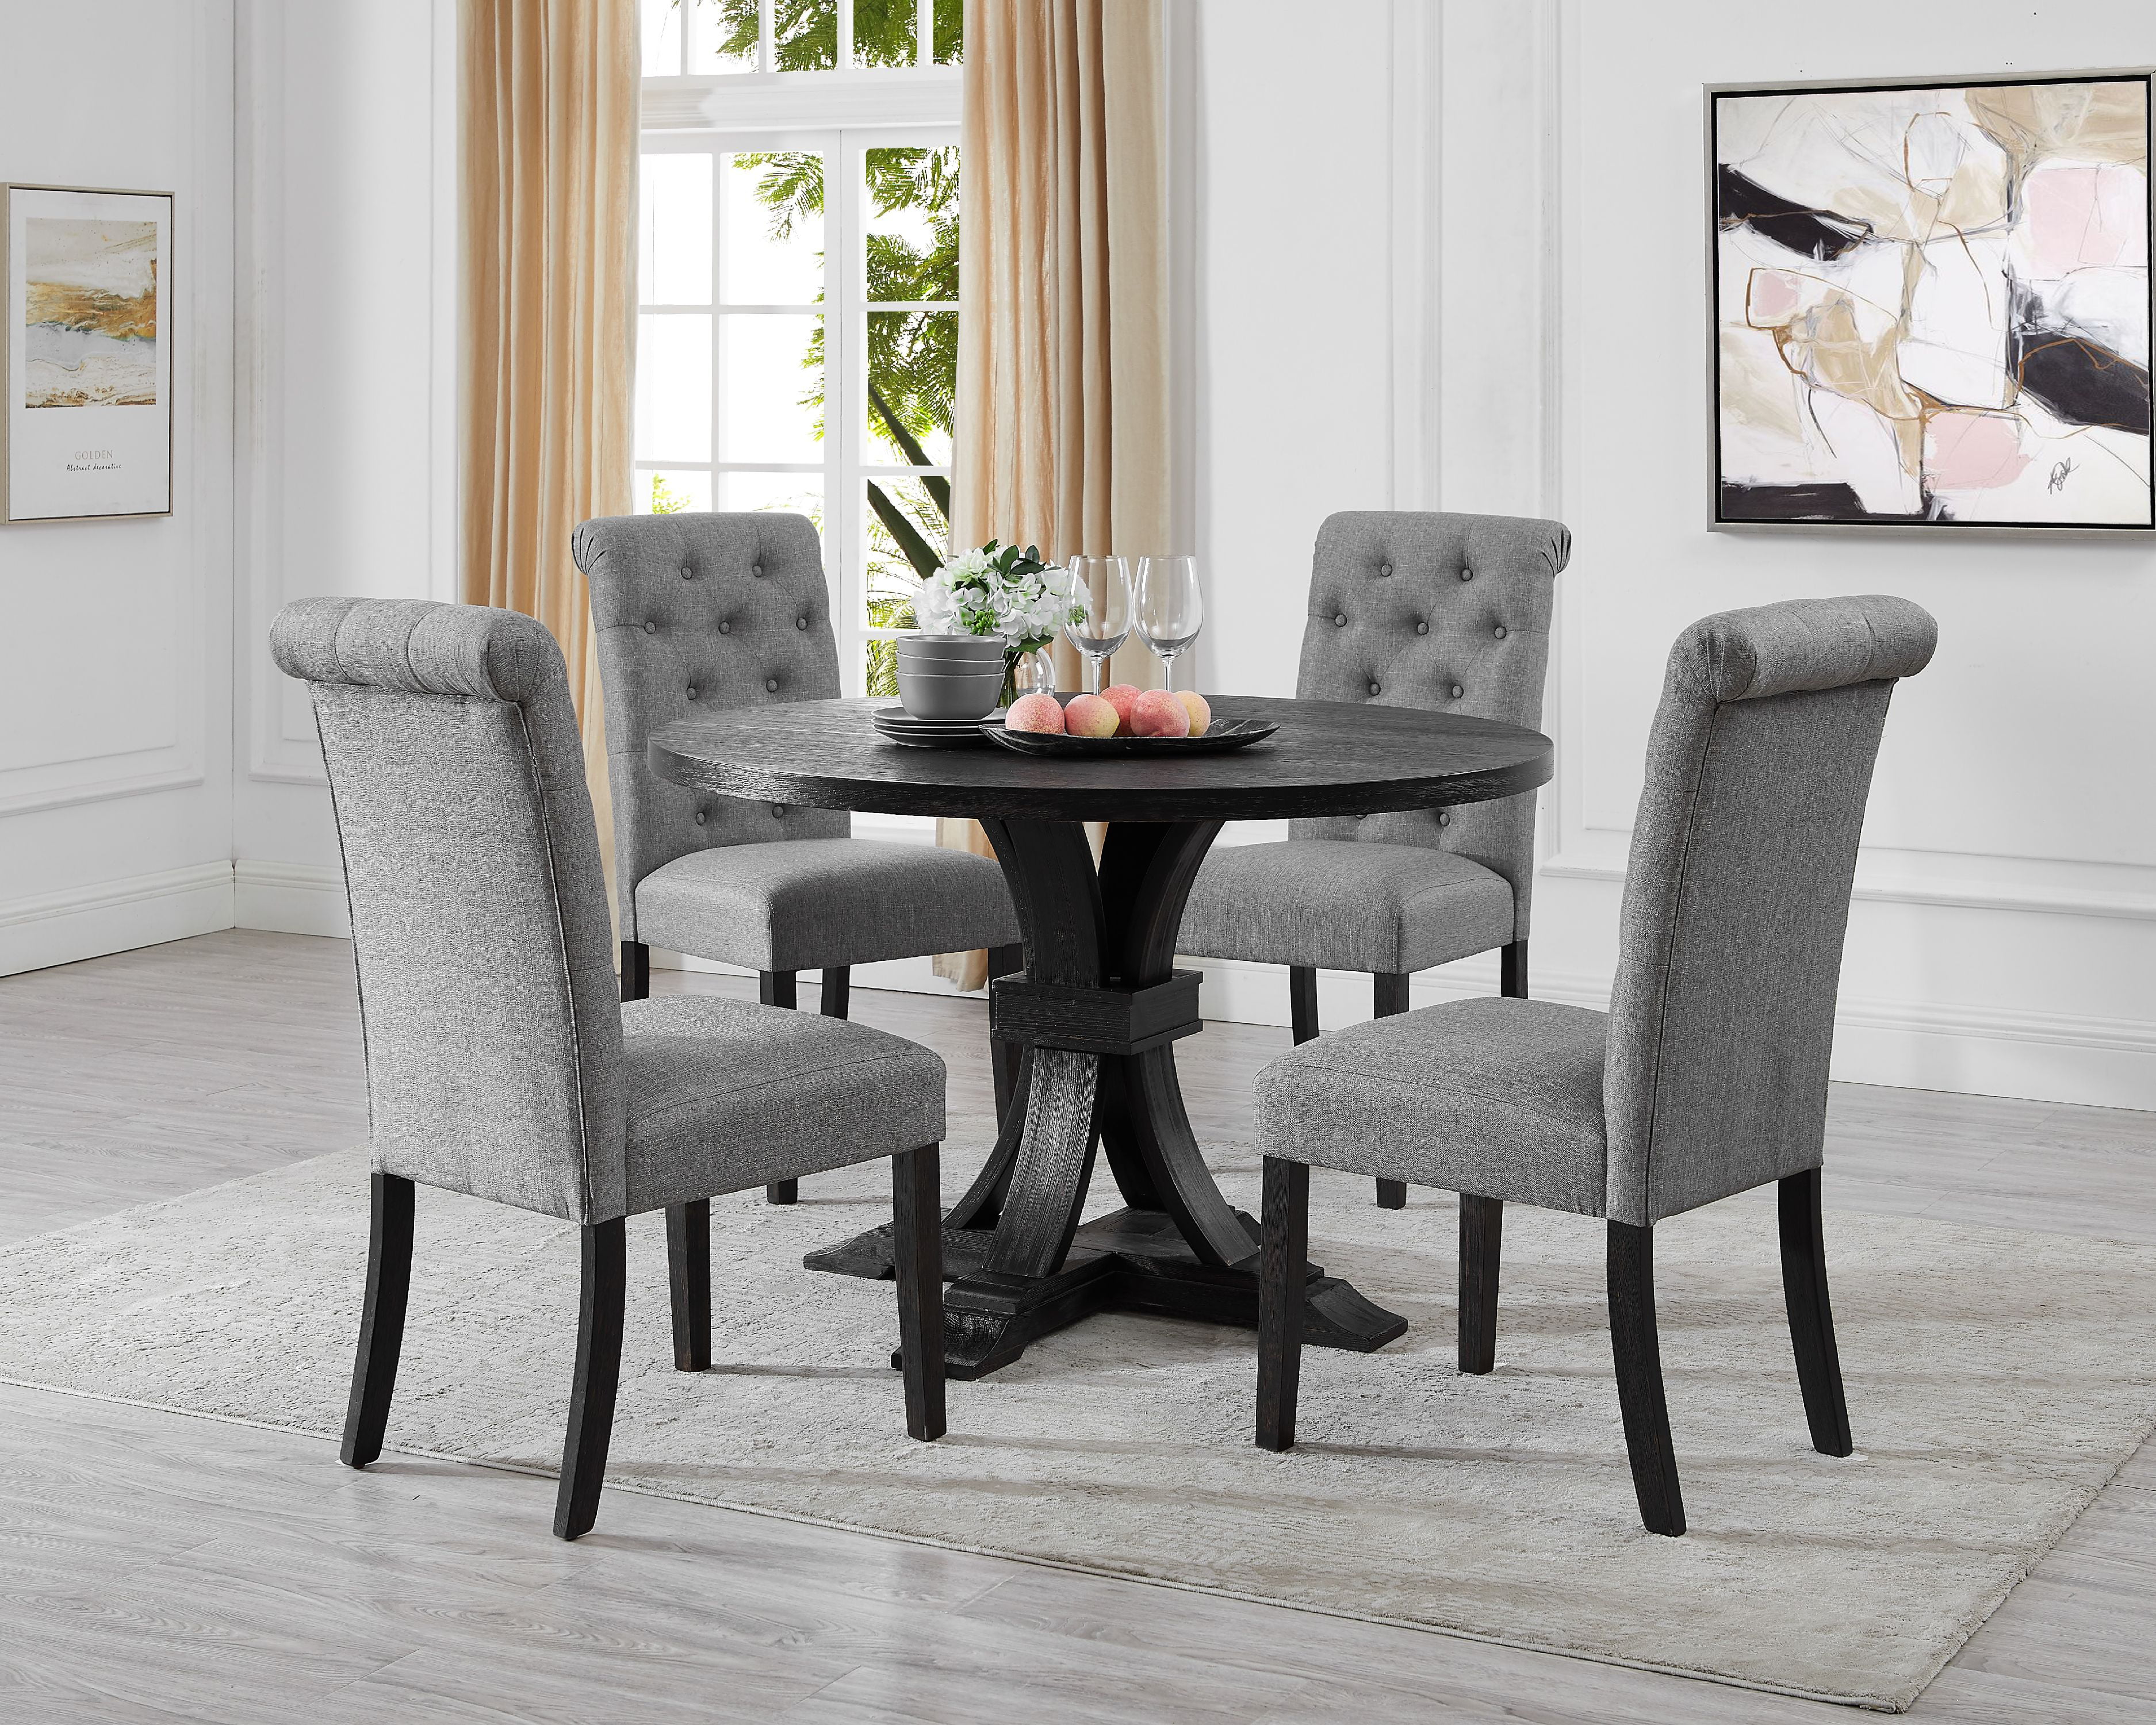 Siena Distressed Black Finish 5 Piece Dining Set Pedestal Round Table With Gray Upholstered Chairs Walmart Com Walmart Com